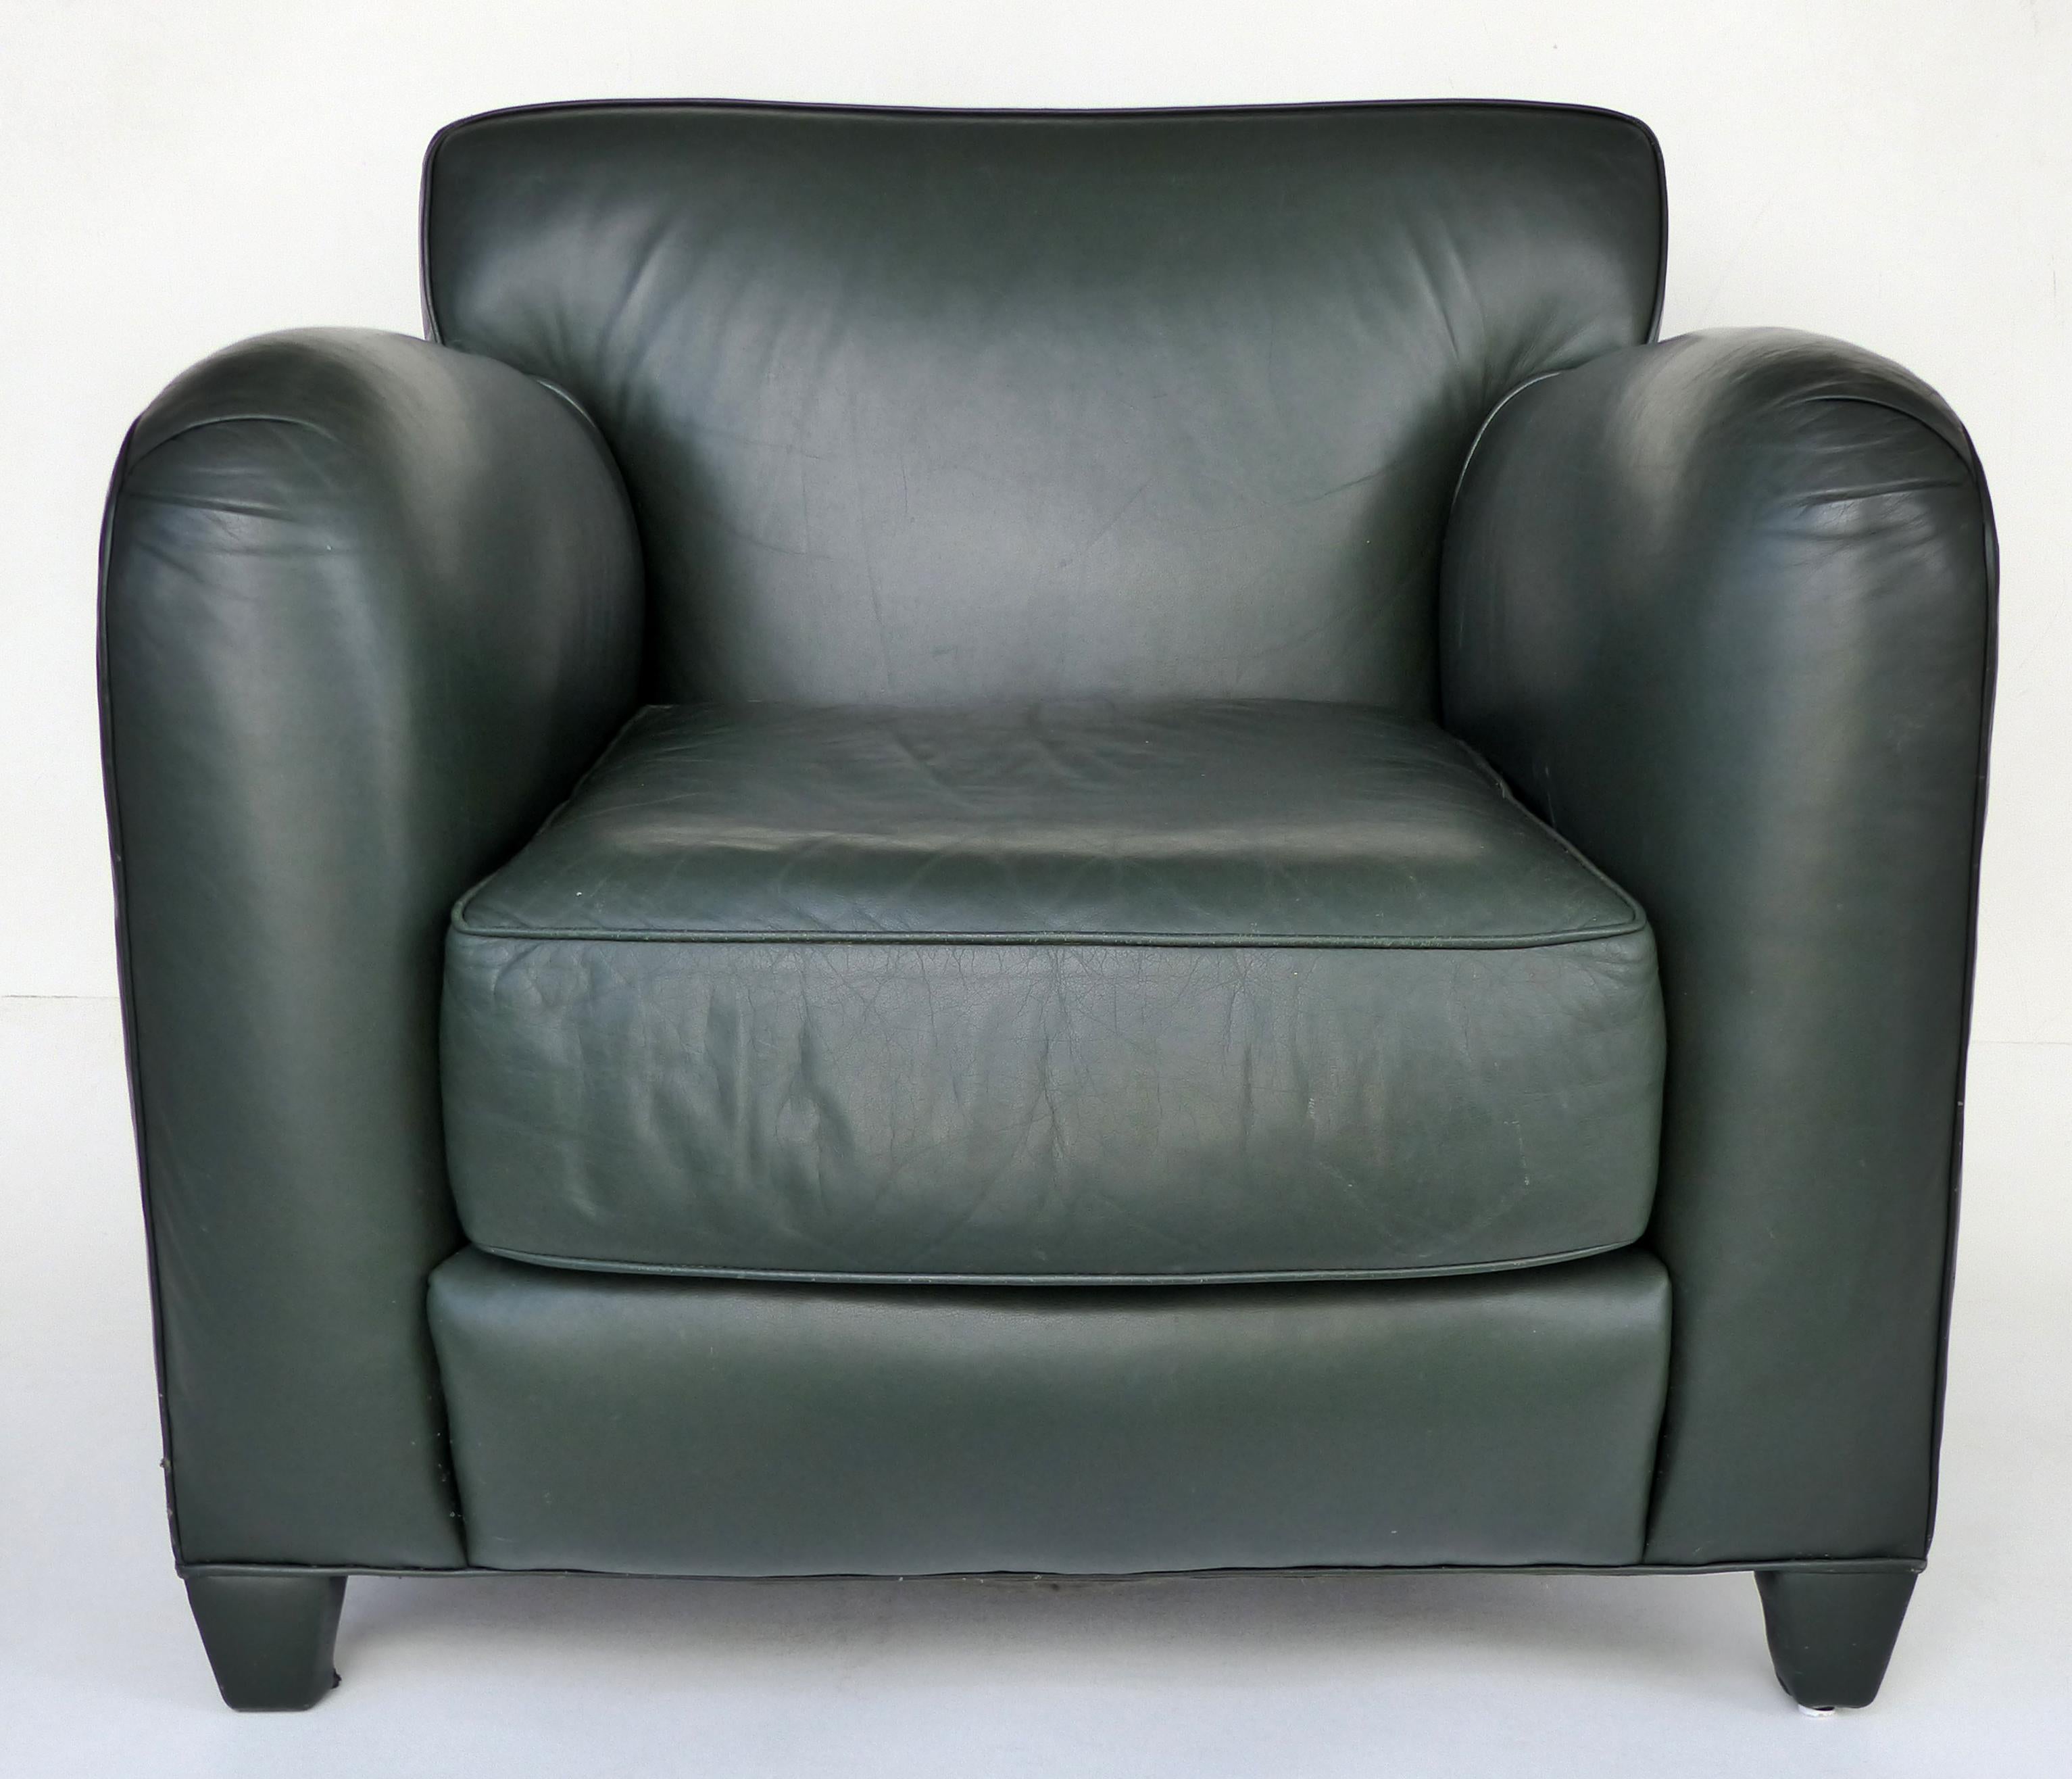 Donghia Leather Club Chairs from the Main Street Collection in Forest Green

 Offered for sale is a pair of Donghia forest green leather club chairs from the Main Street collection. These comfortable club chairs have deep, supple leather seats with